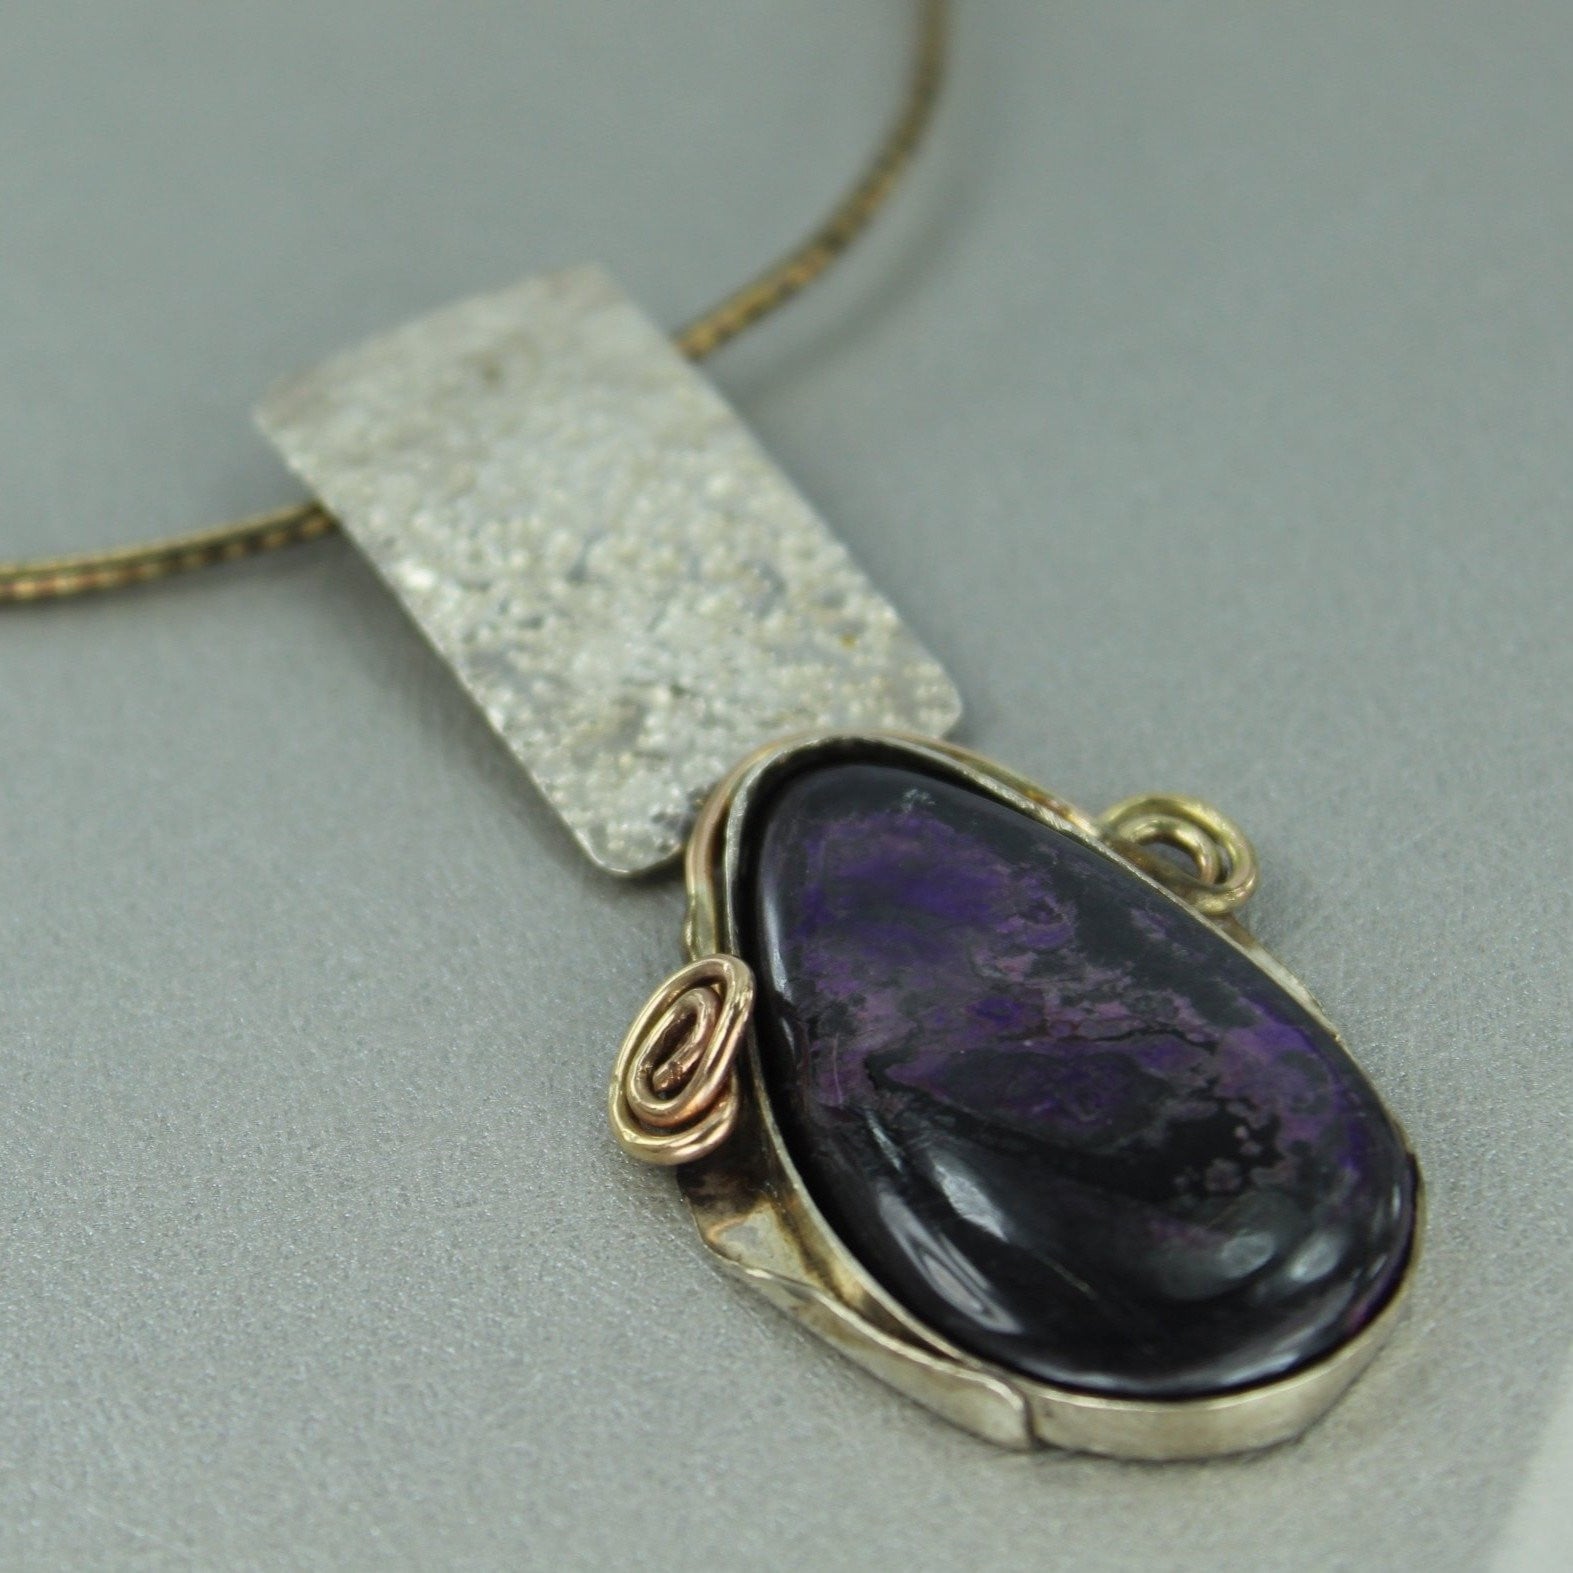 Hand Crafted Necklace Large Mix Metal Purple Stone Pendant Technibond Chain Isadora